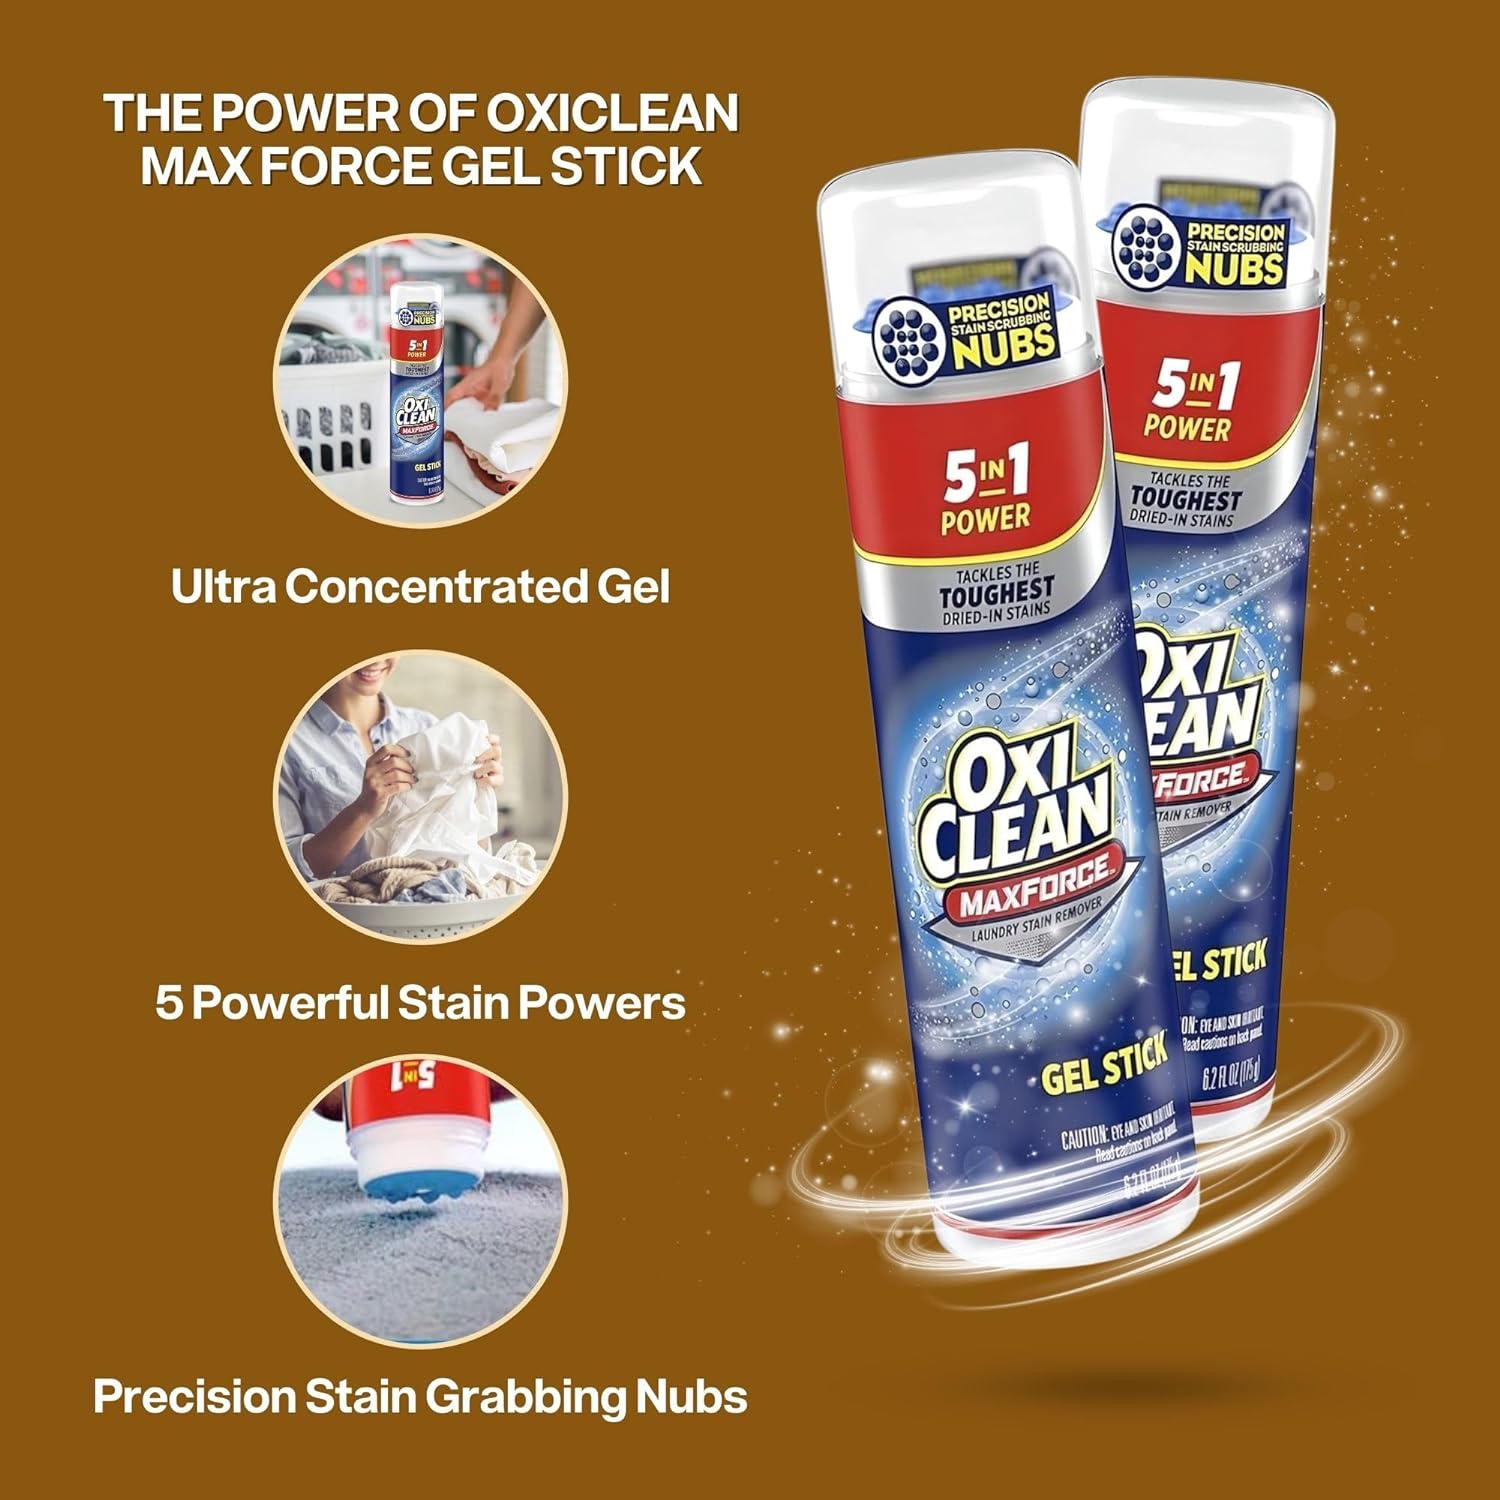 Stain Sticks For Clothes & Heavy Duty Laundry Bag Bundle: Featuring Two-"Oxi" Clean 6.2 Oz Gel Stick & One Extra-Large 24x36" Carefree Caribou Laundry Bags. Ideal for Travel, Gym & Home Use : Health & Household